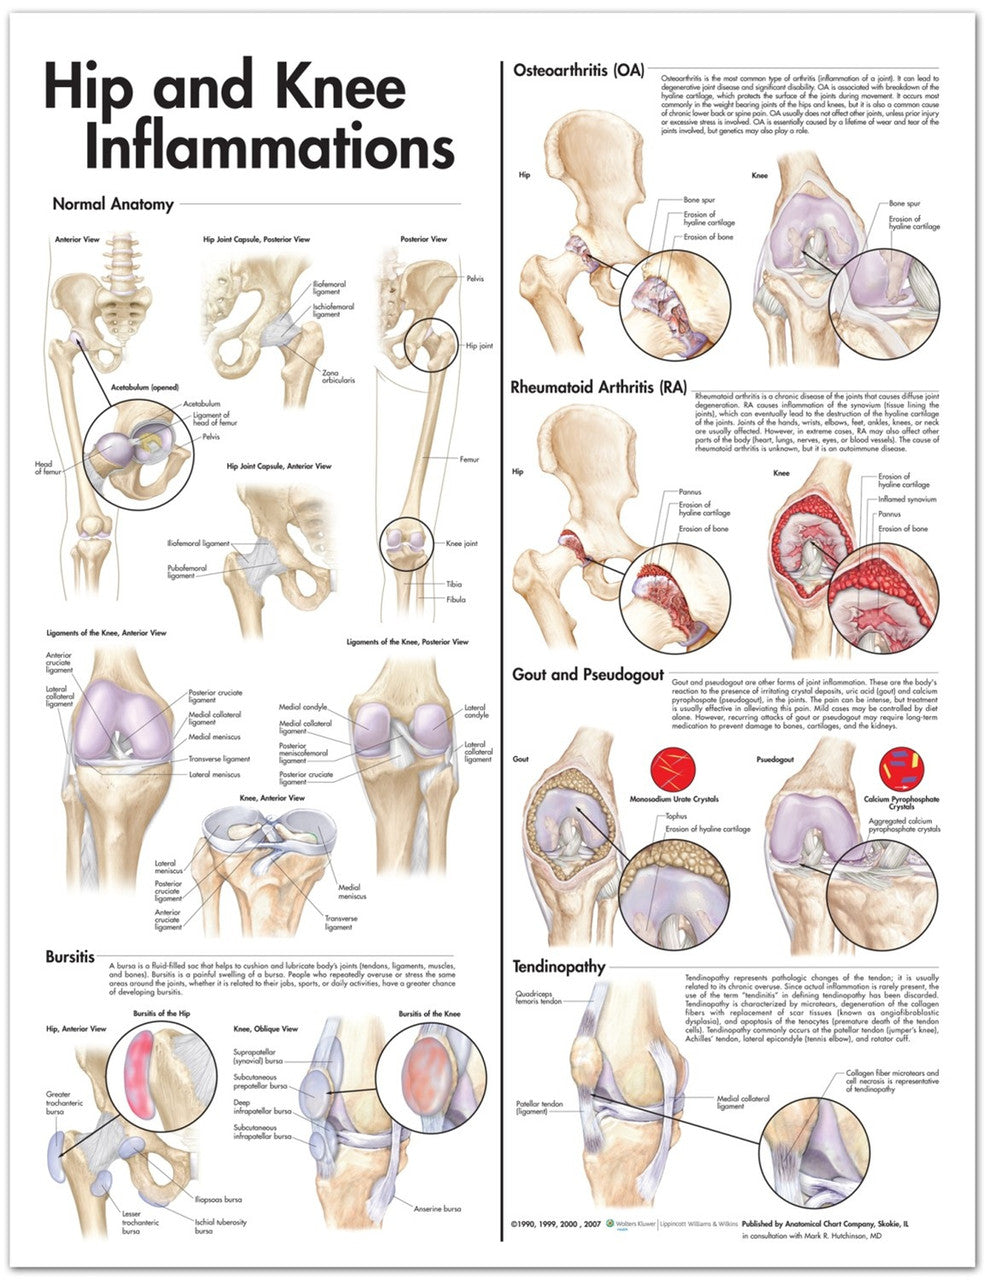 Hip and Knee Inflammation chart - 20" x 26"